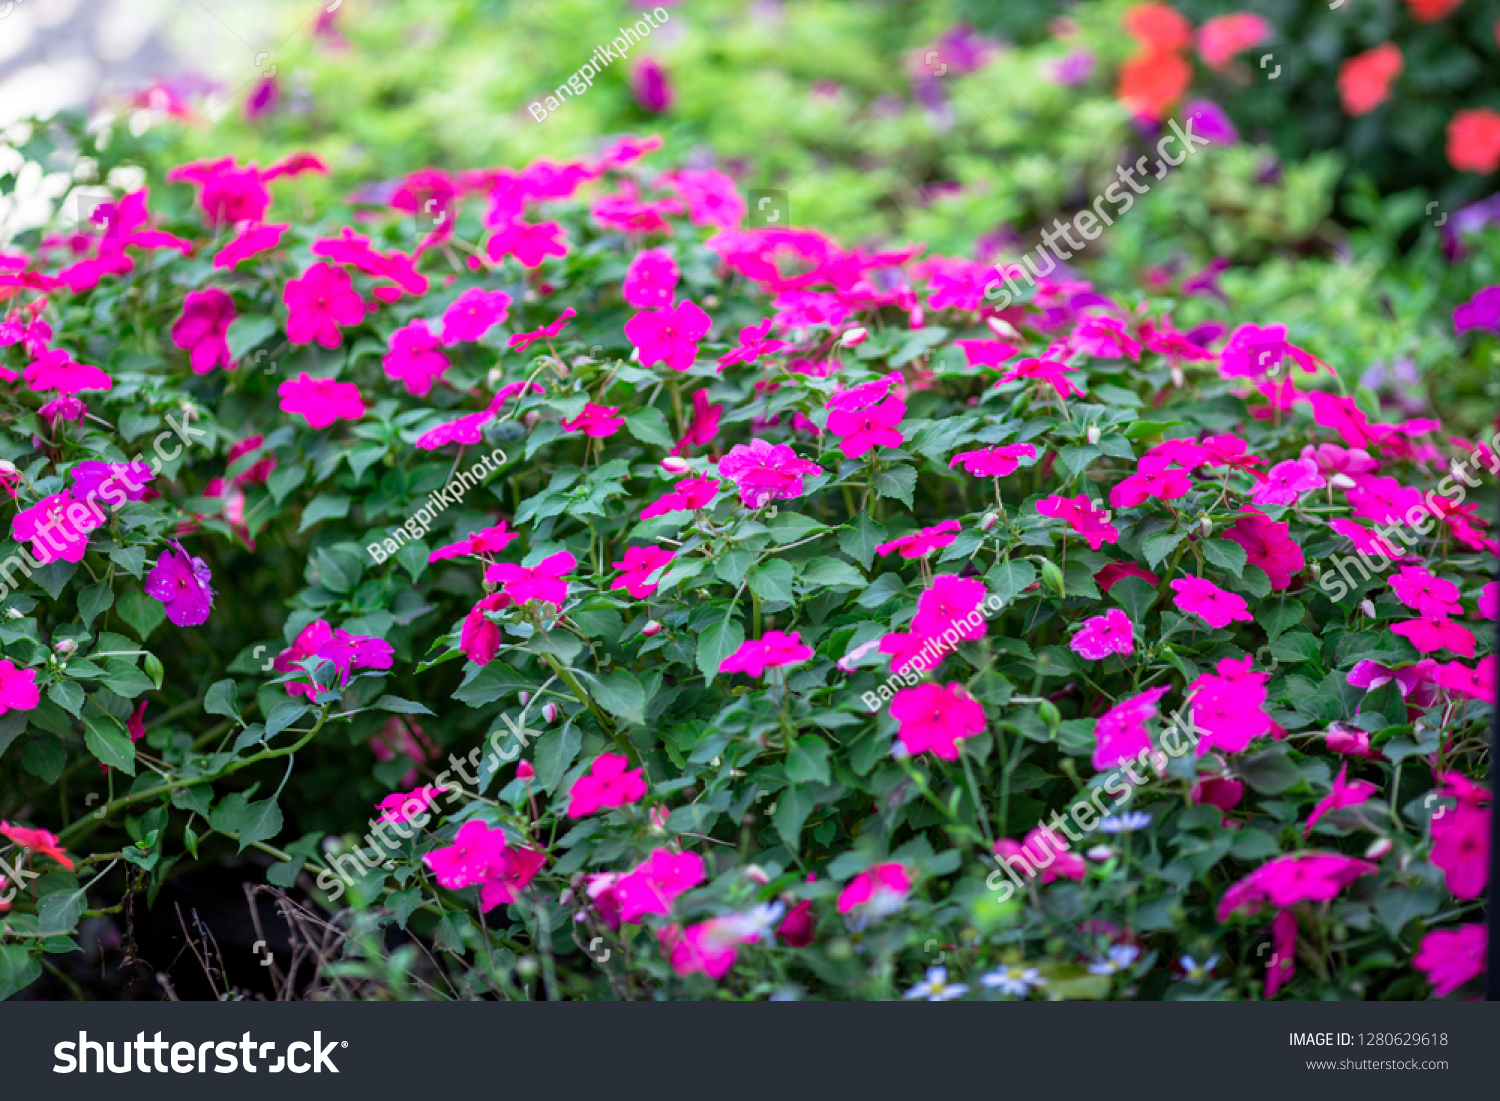 Close-up view of colorful flowers Cultivated in plots for expansion or used to decorate, decorate or decorate the coffee shop, restaurant for beauty #1280629618